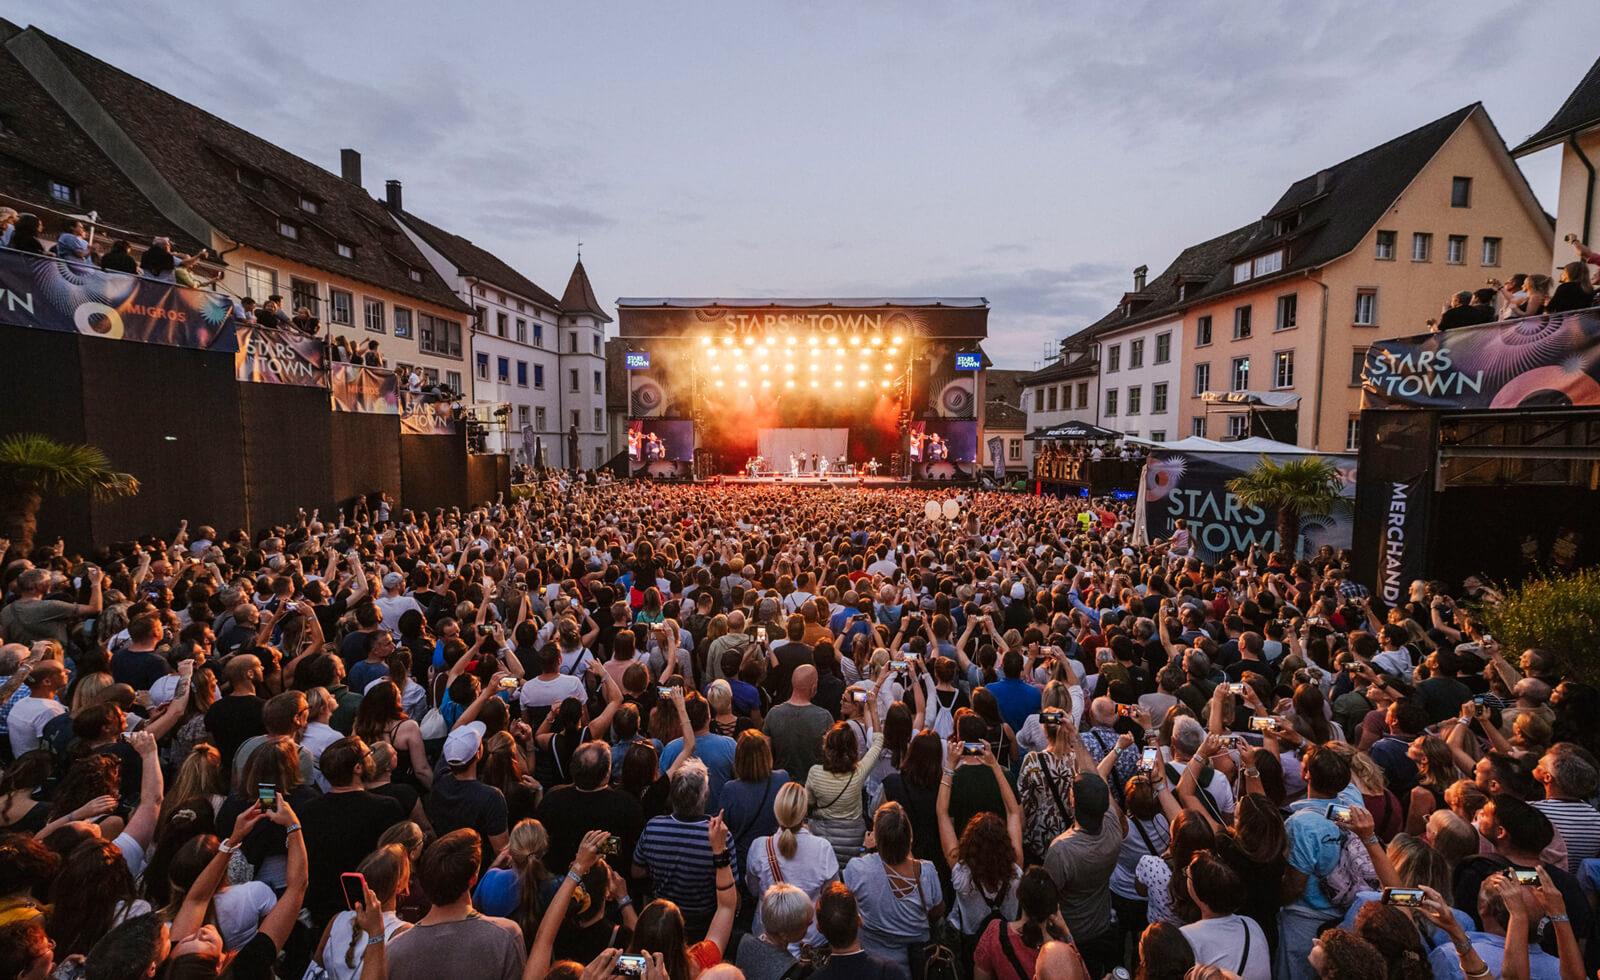 The main stage of Stars In Town during a performance of Lo&Leduc - Copyright Roman Wüest/Stars in Town